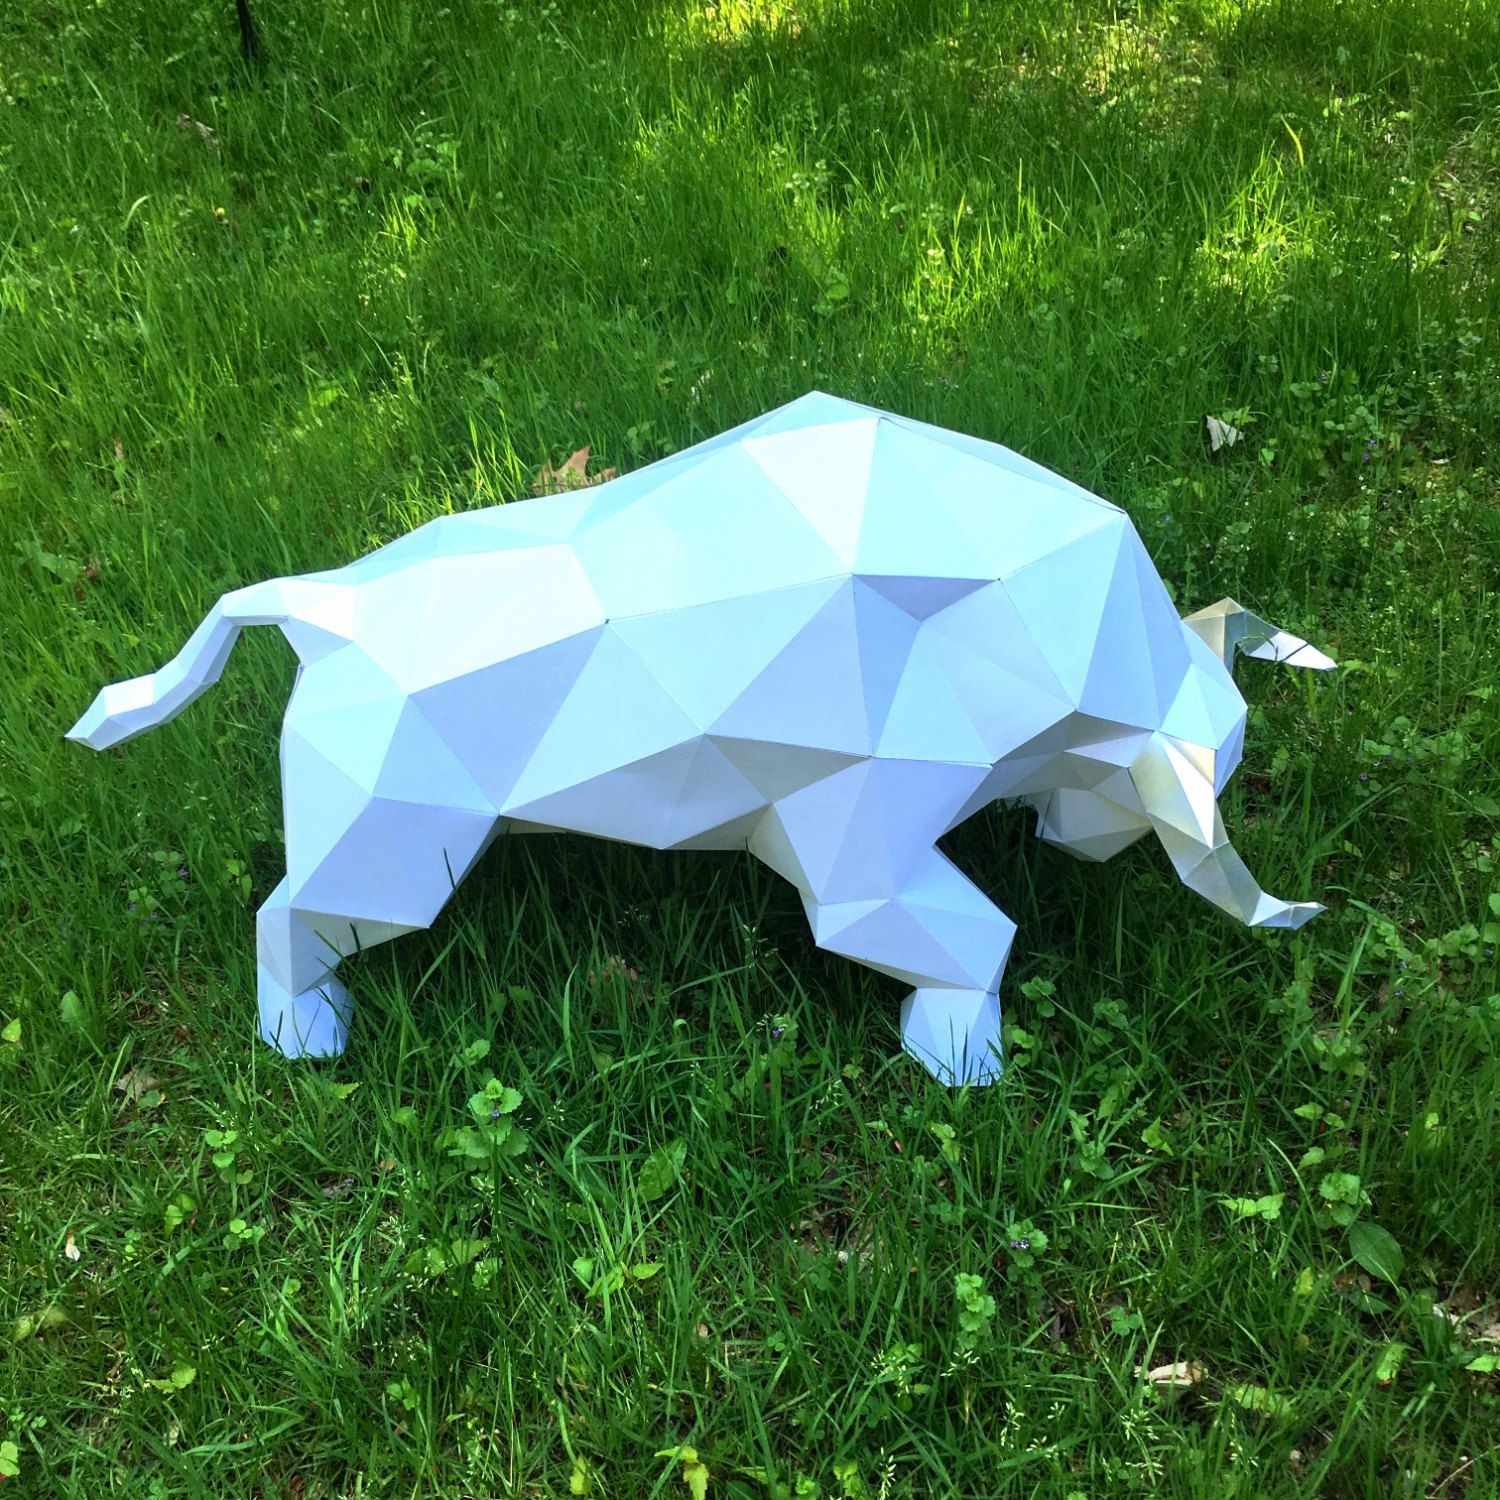 Ds Papercraft Bull Body Papercraft You A Pdf Digital File Templates and